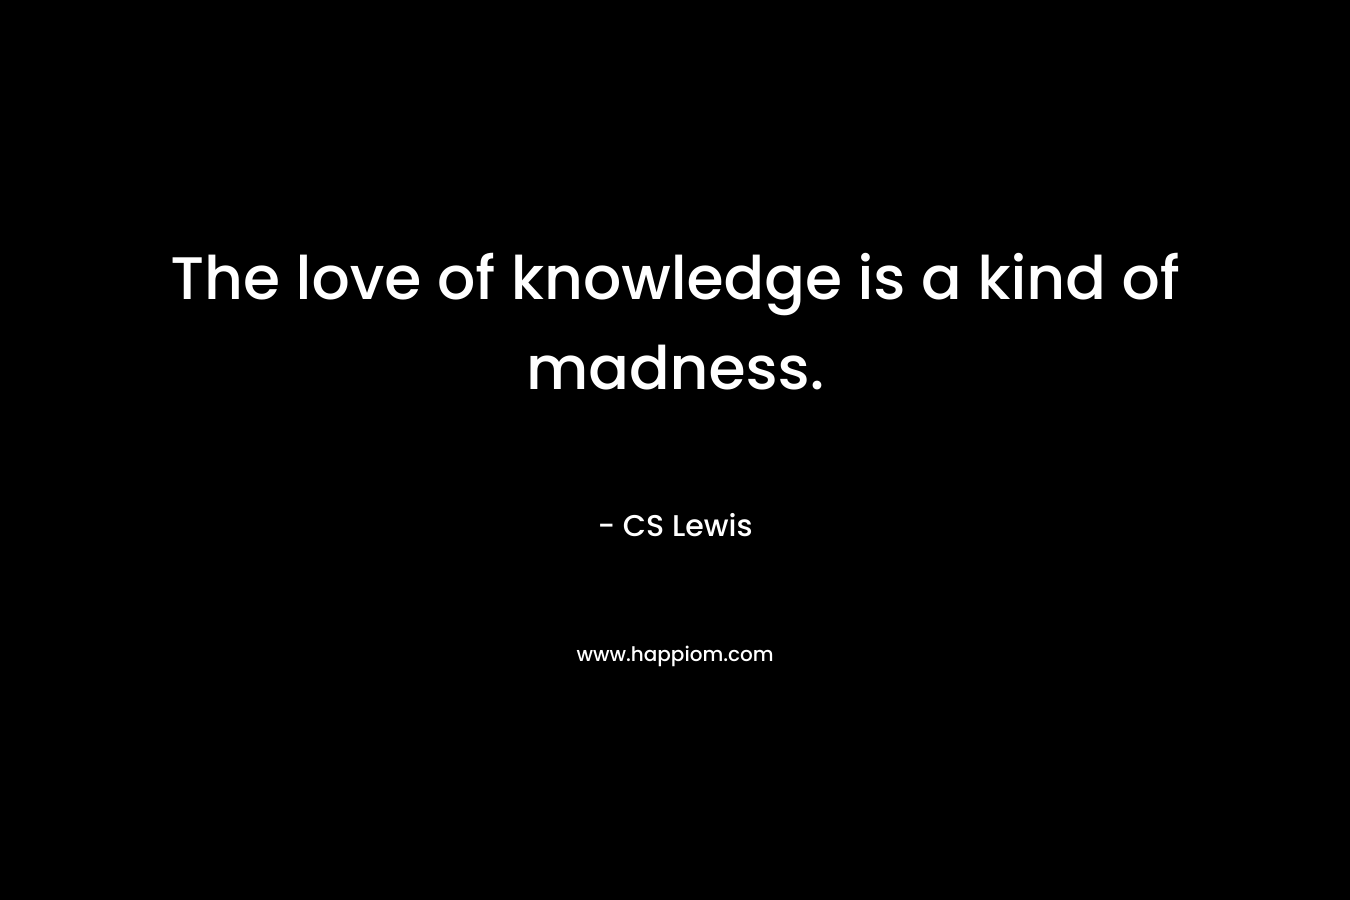 The love of knowledge is a kind of madness.